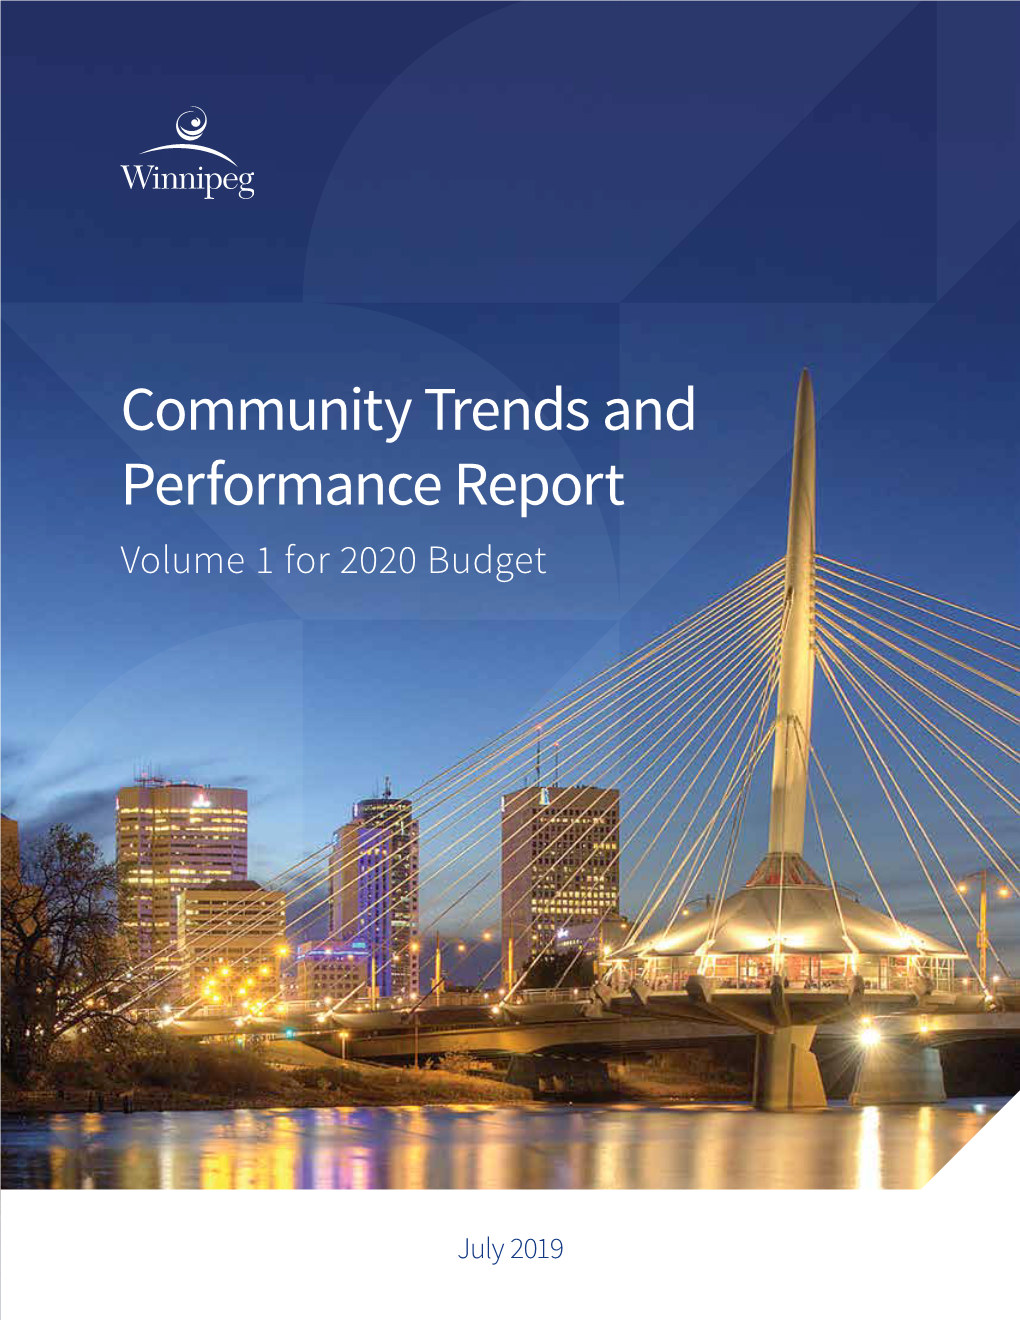 Community Trends and Performance Report – Volume 1 for 2020 Budget